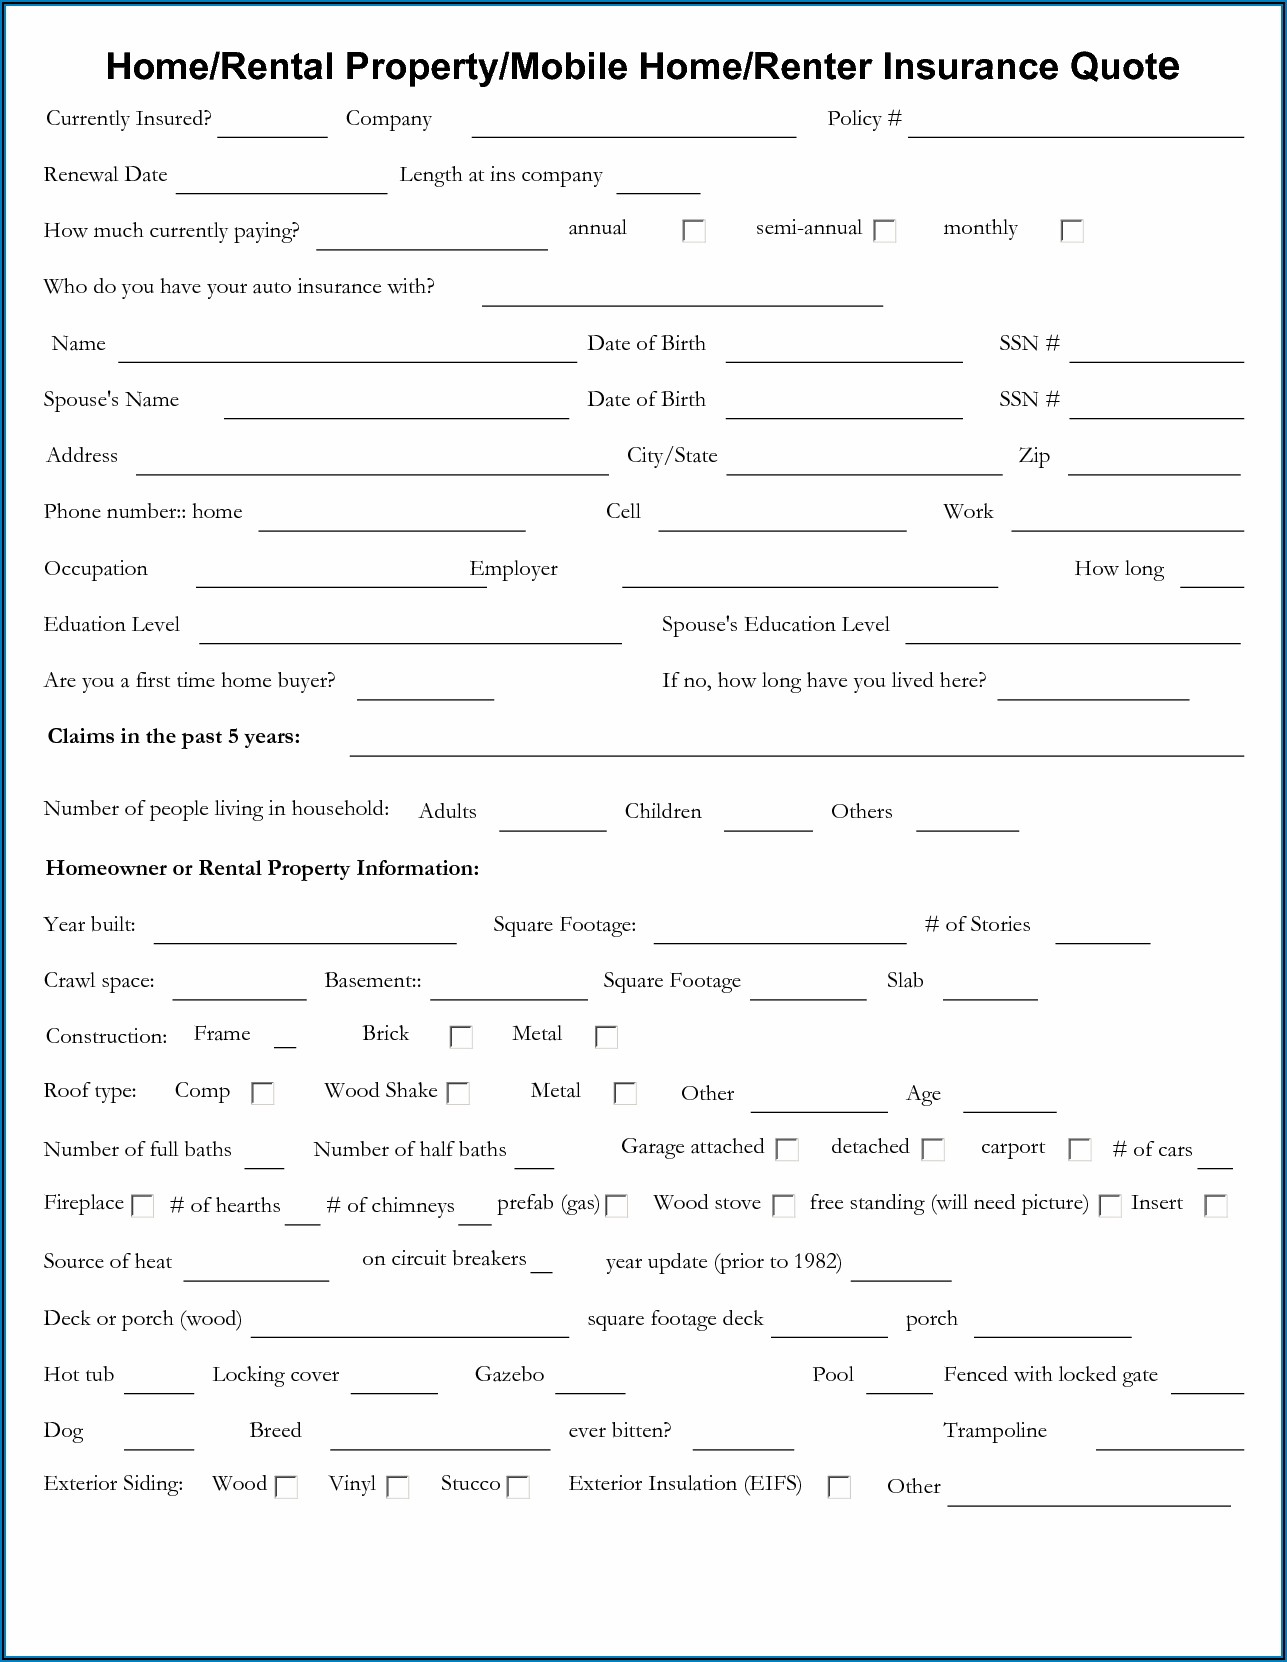 Home Insurance Quote Sheet Template